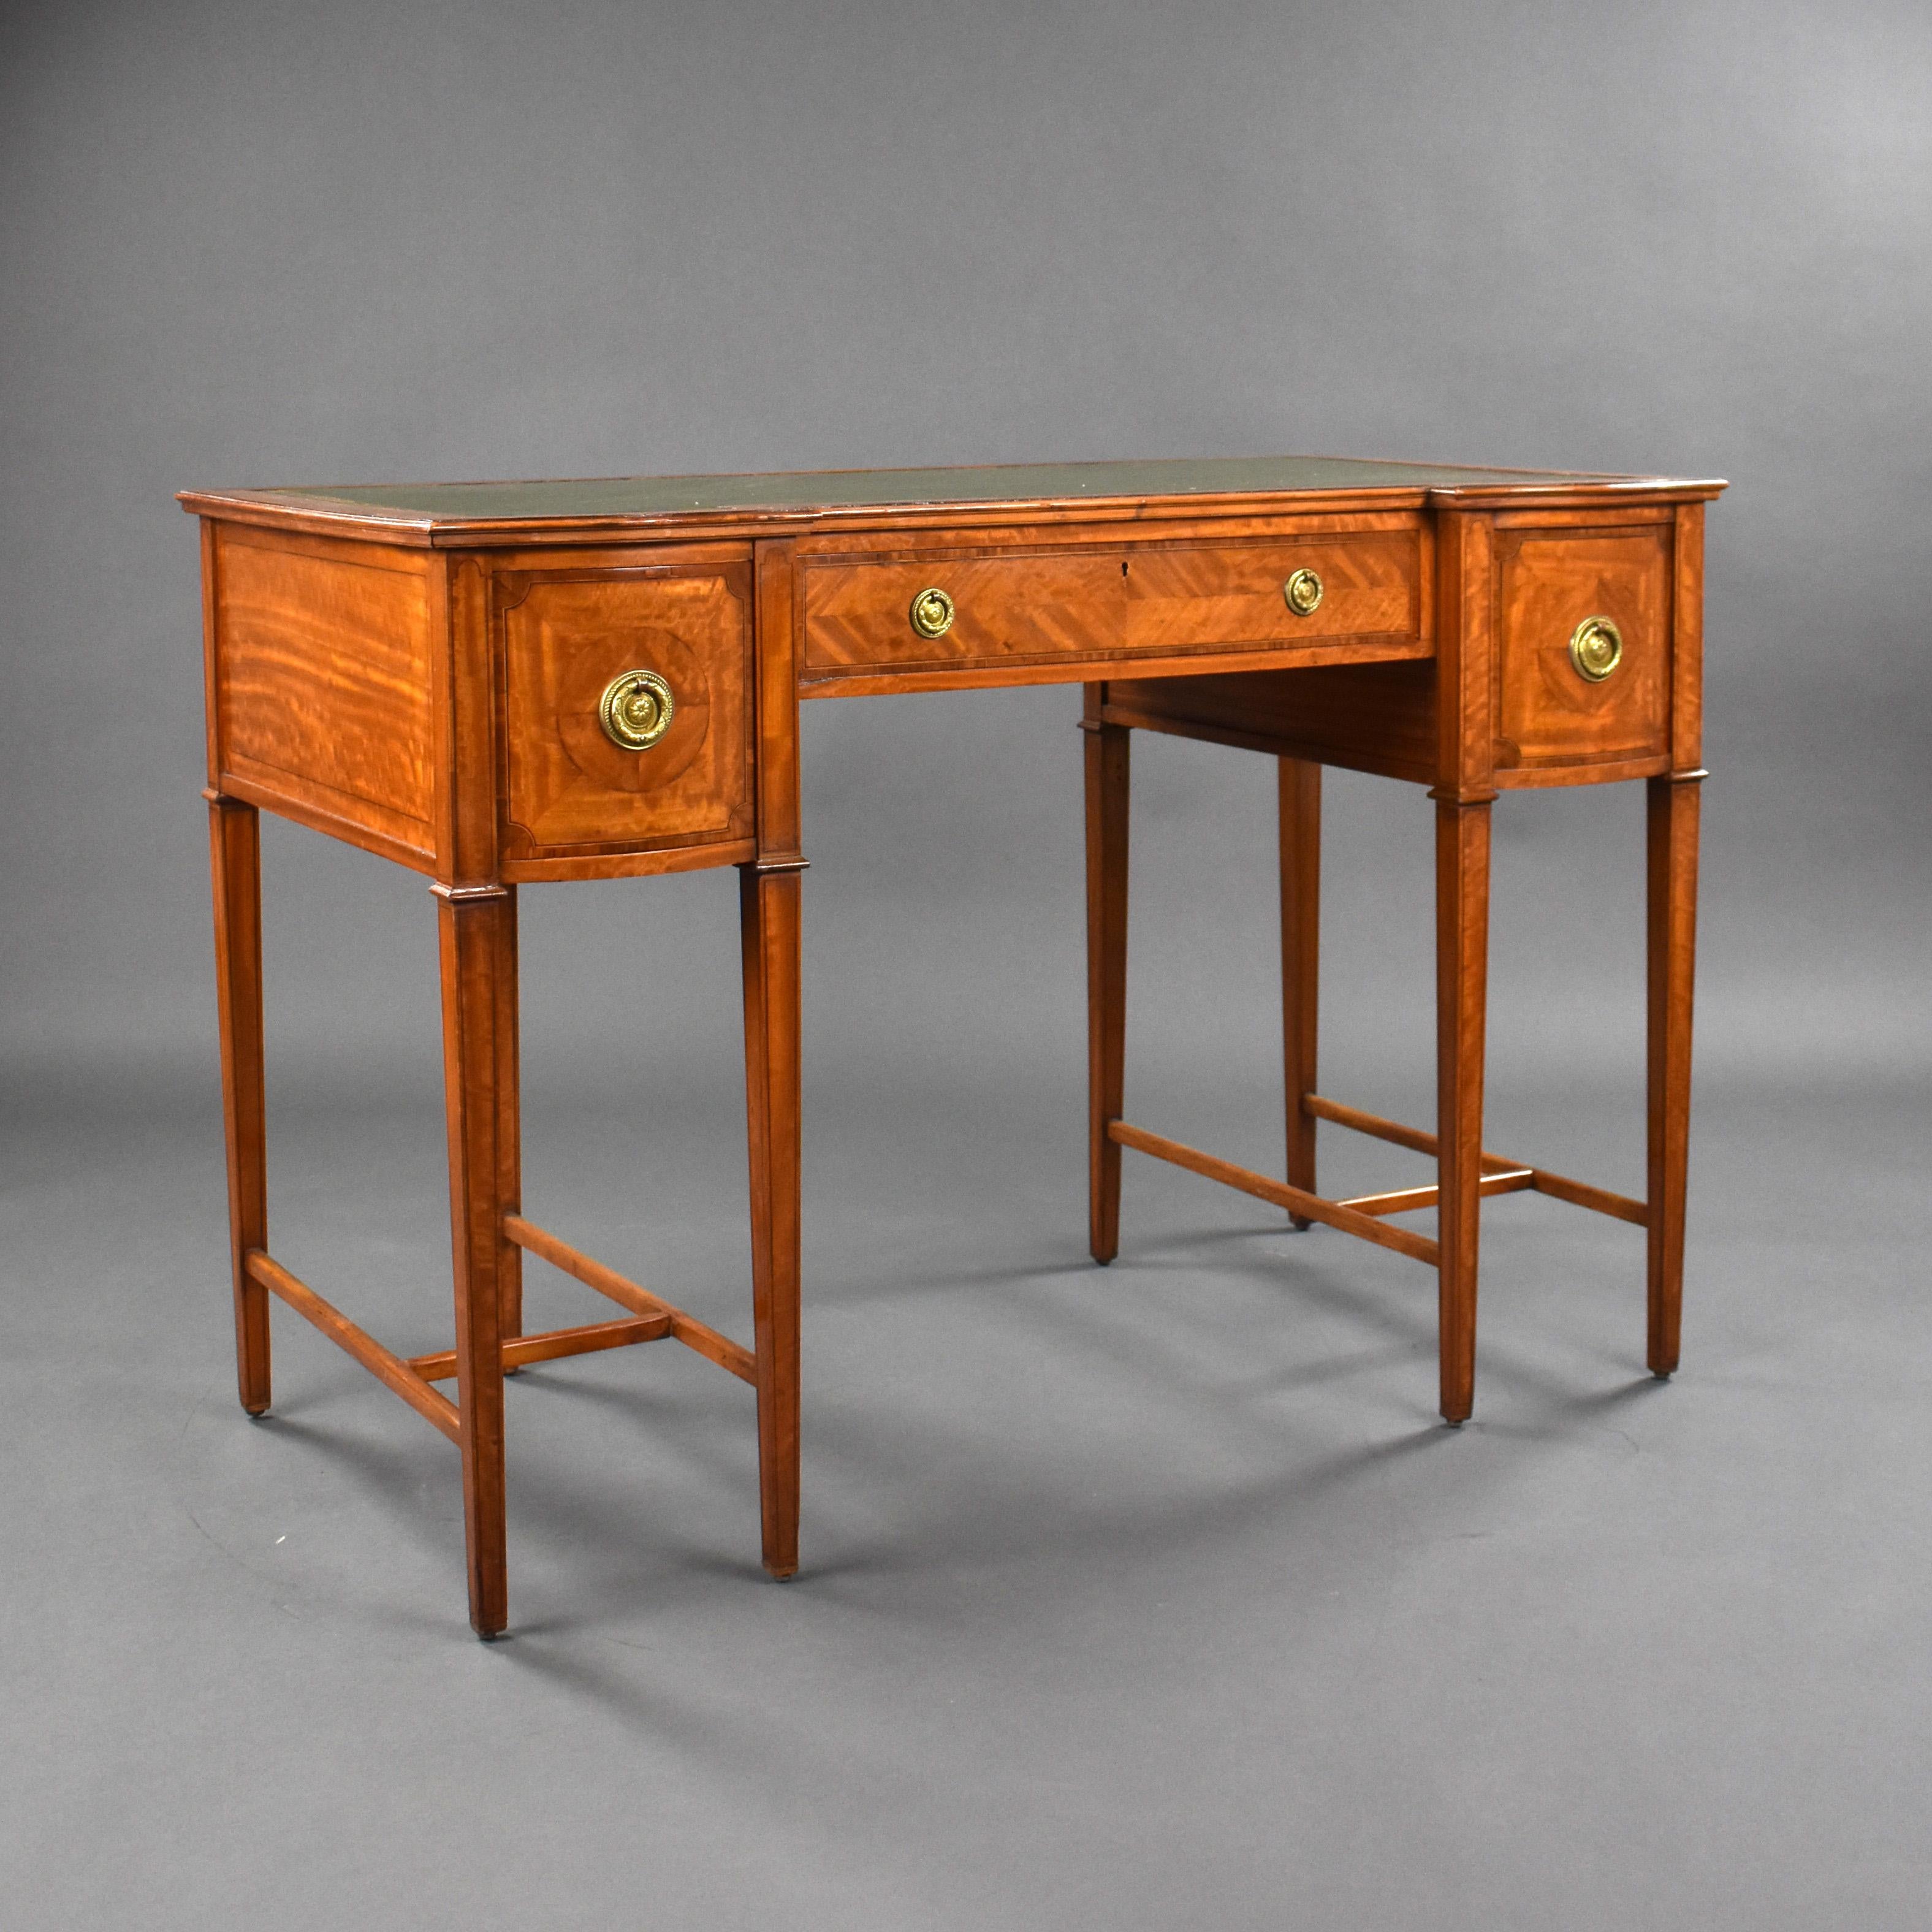 For sale is a good quality Edwardian satinwood writing table, having a green leather insert, decorated with hold tooling, above an arrangement of three drawers each with brass handles. The desk stands on elegant legs united by stretchers. This piece